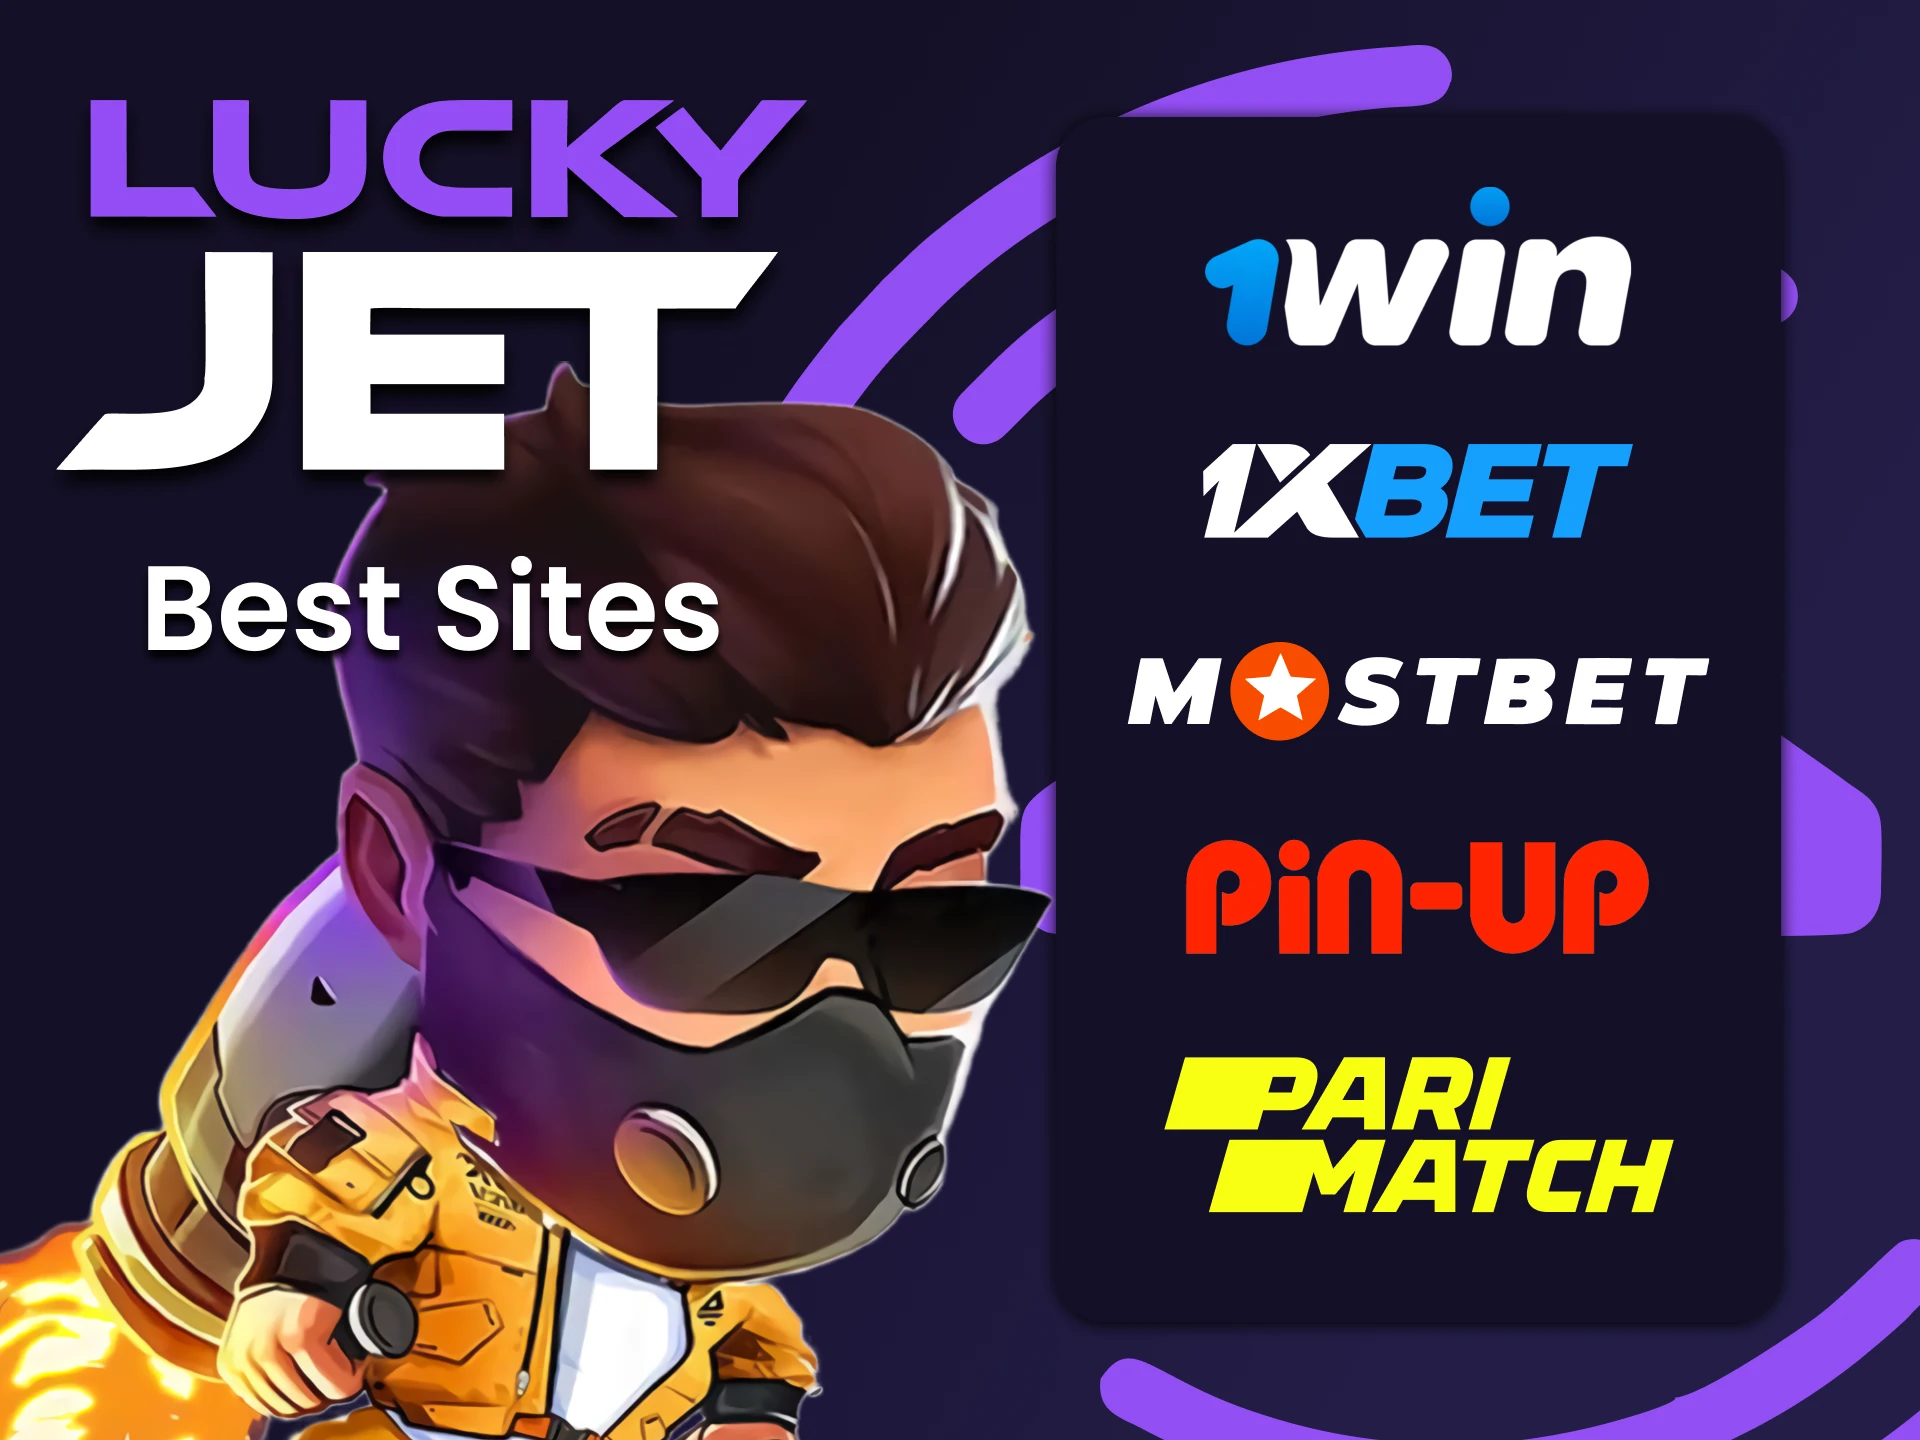 Find out about the best sites to play Lucky Jet.